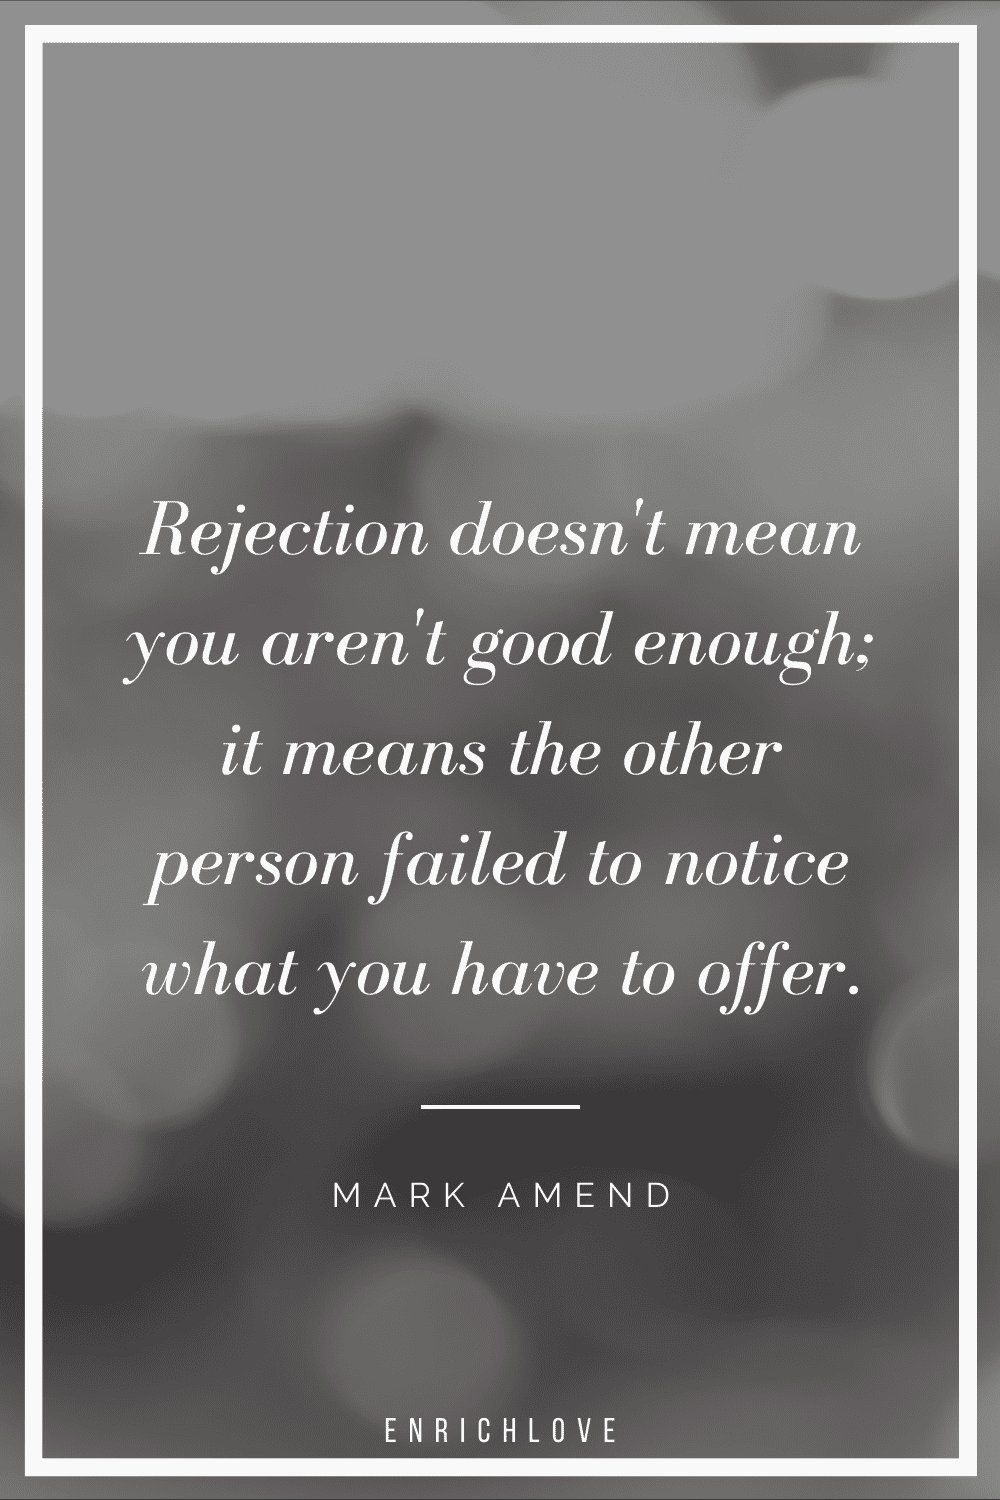 Rejection doesn't mean you aren't good enough; it means the other person failed to notice what you have to offer.